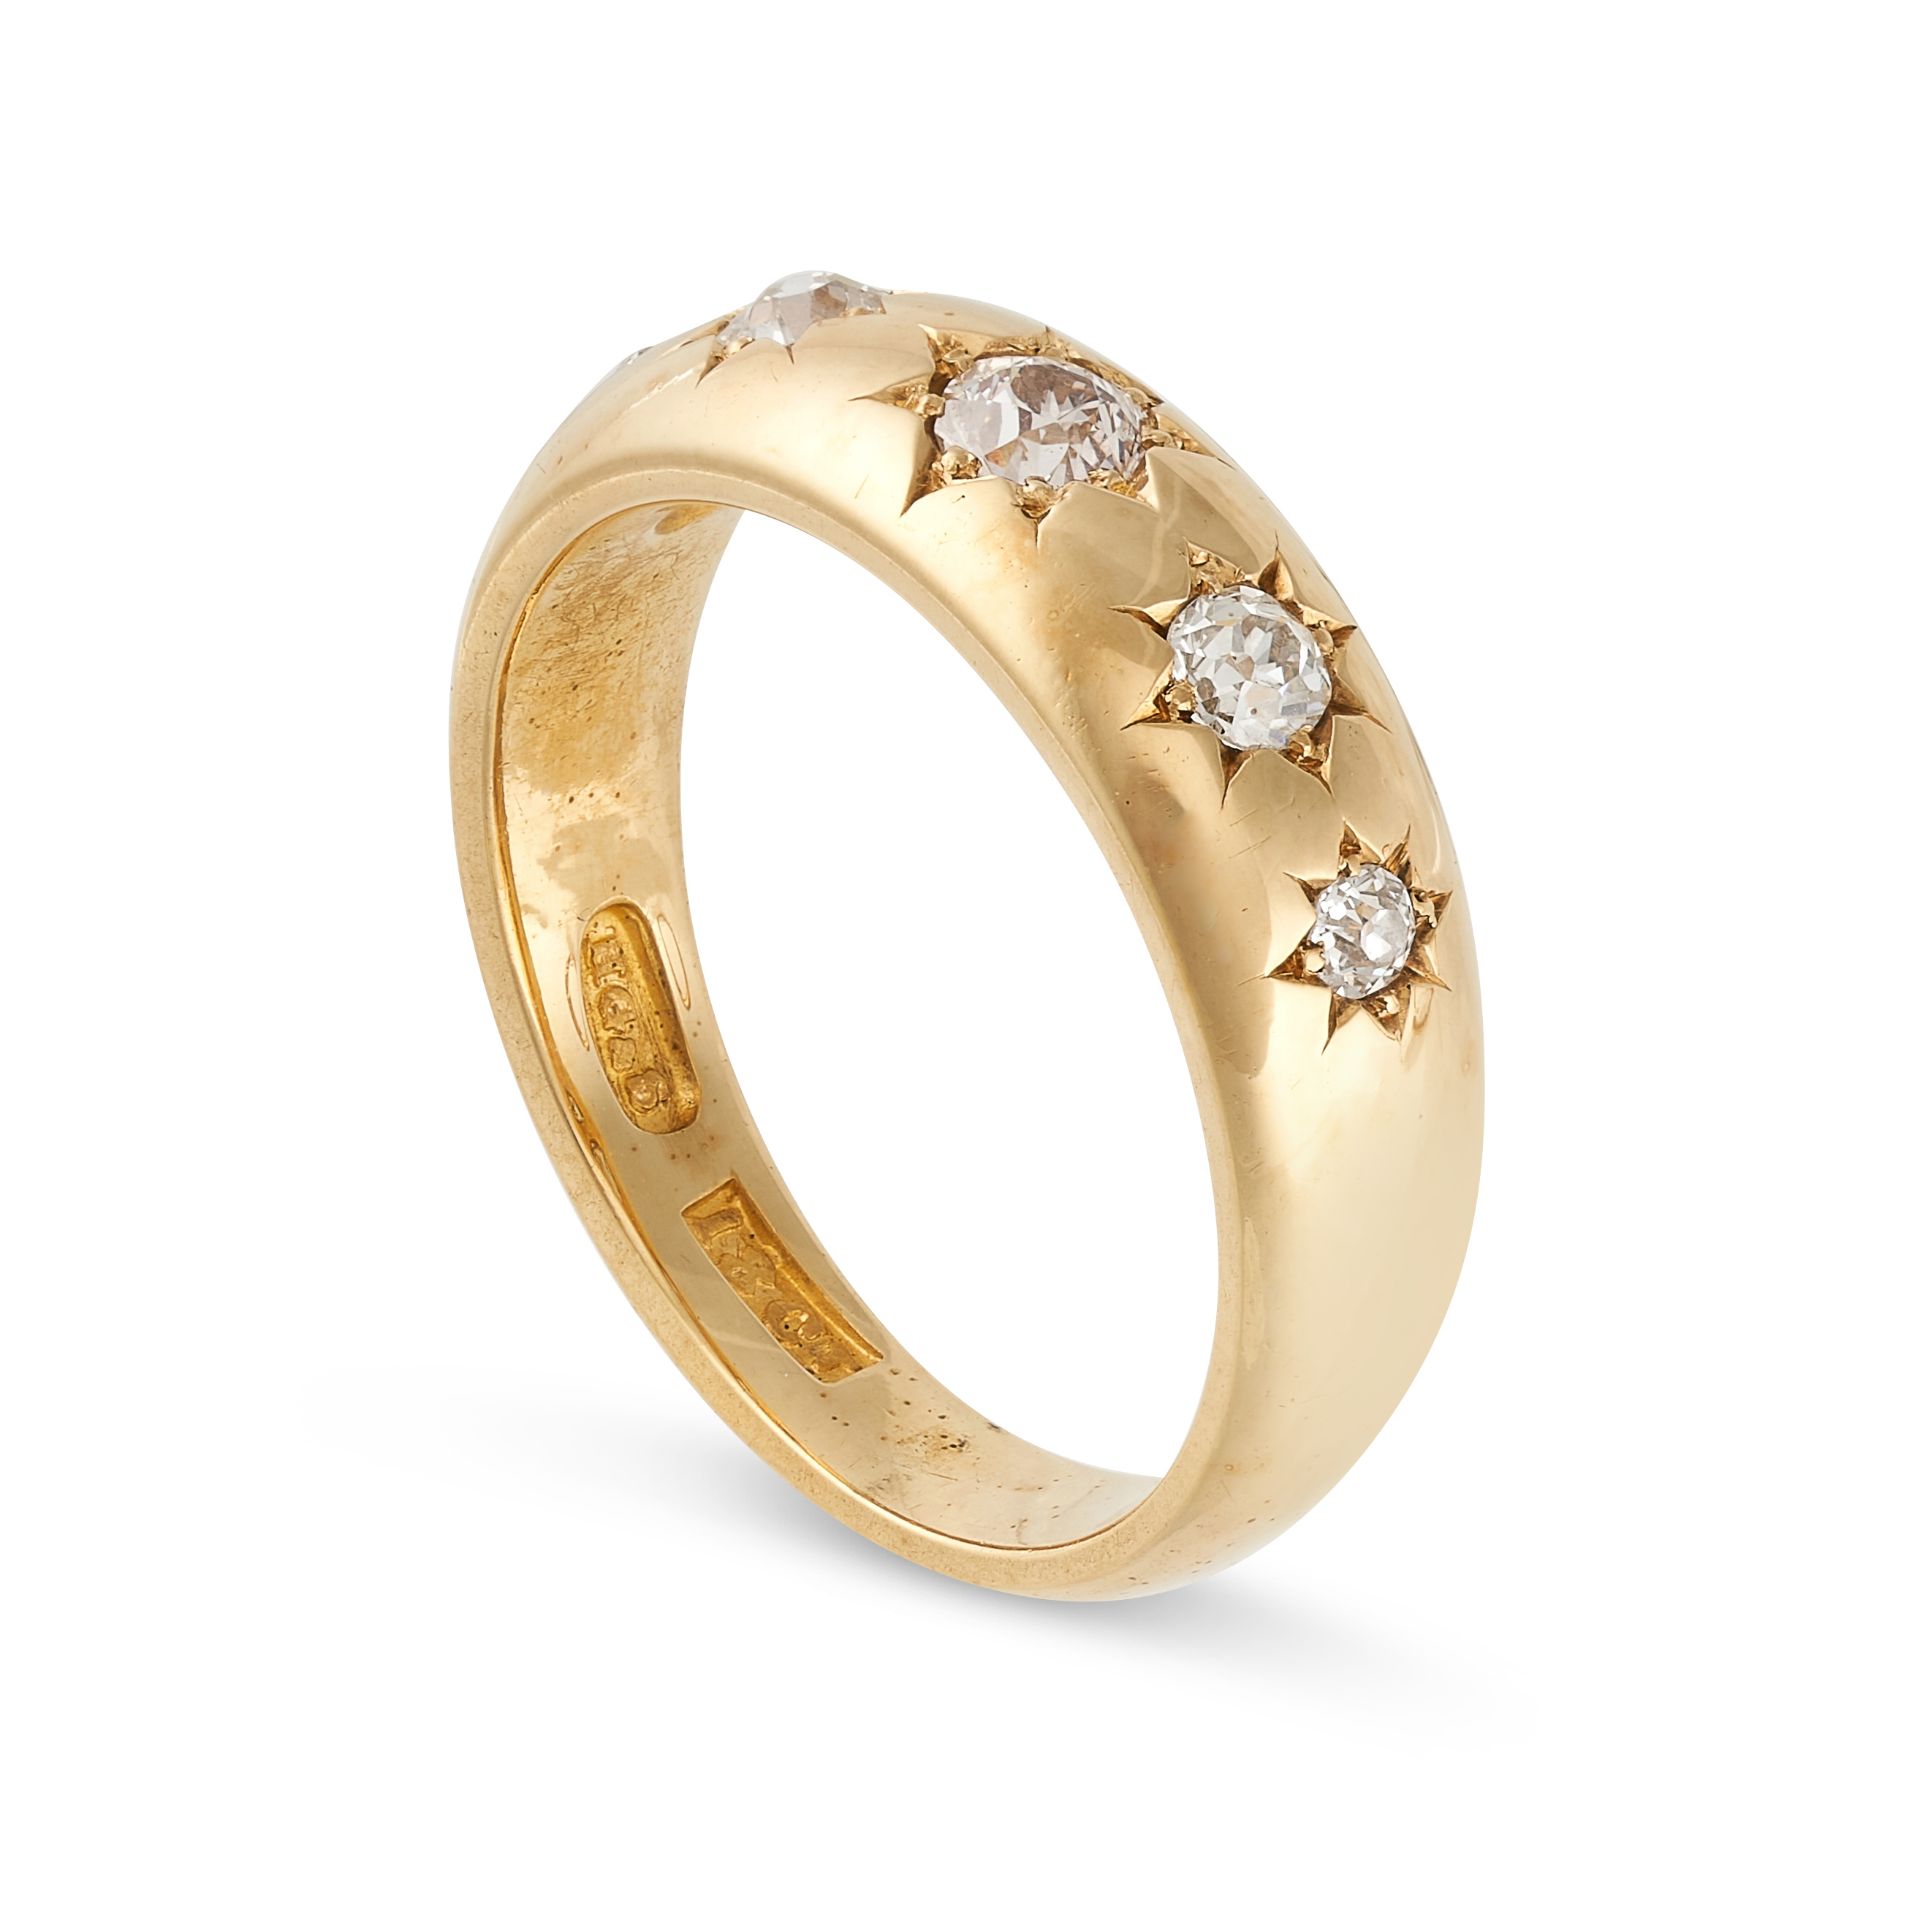 NO RESERVE - AN ANTIQUE DIAMOND GYPSY RING in 18ct yellow gold, the tapering band set with a row - Image 2 of 2